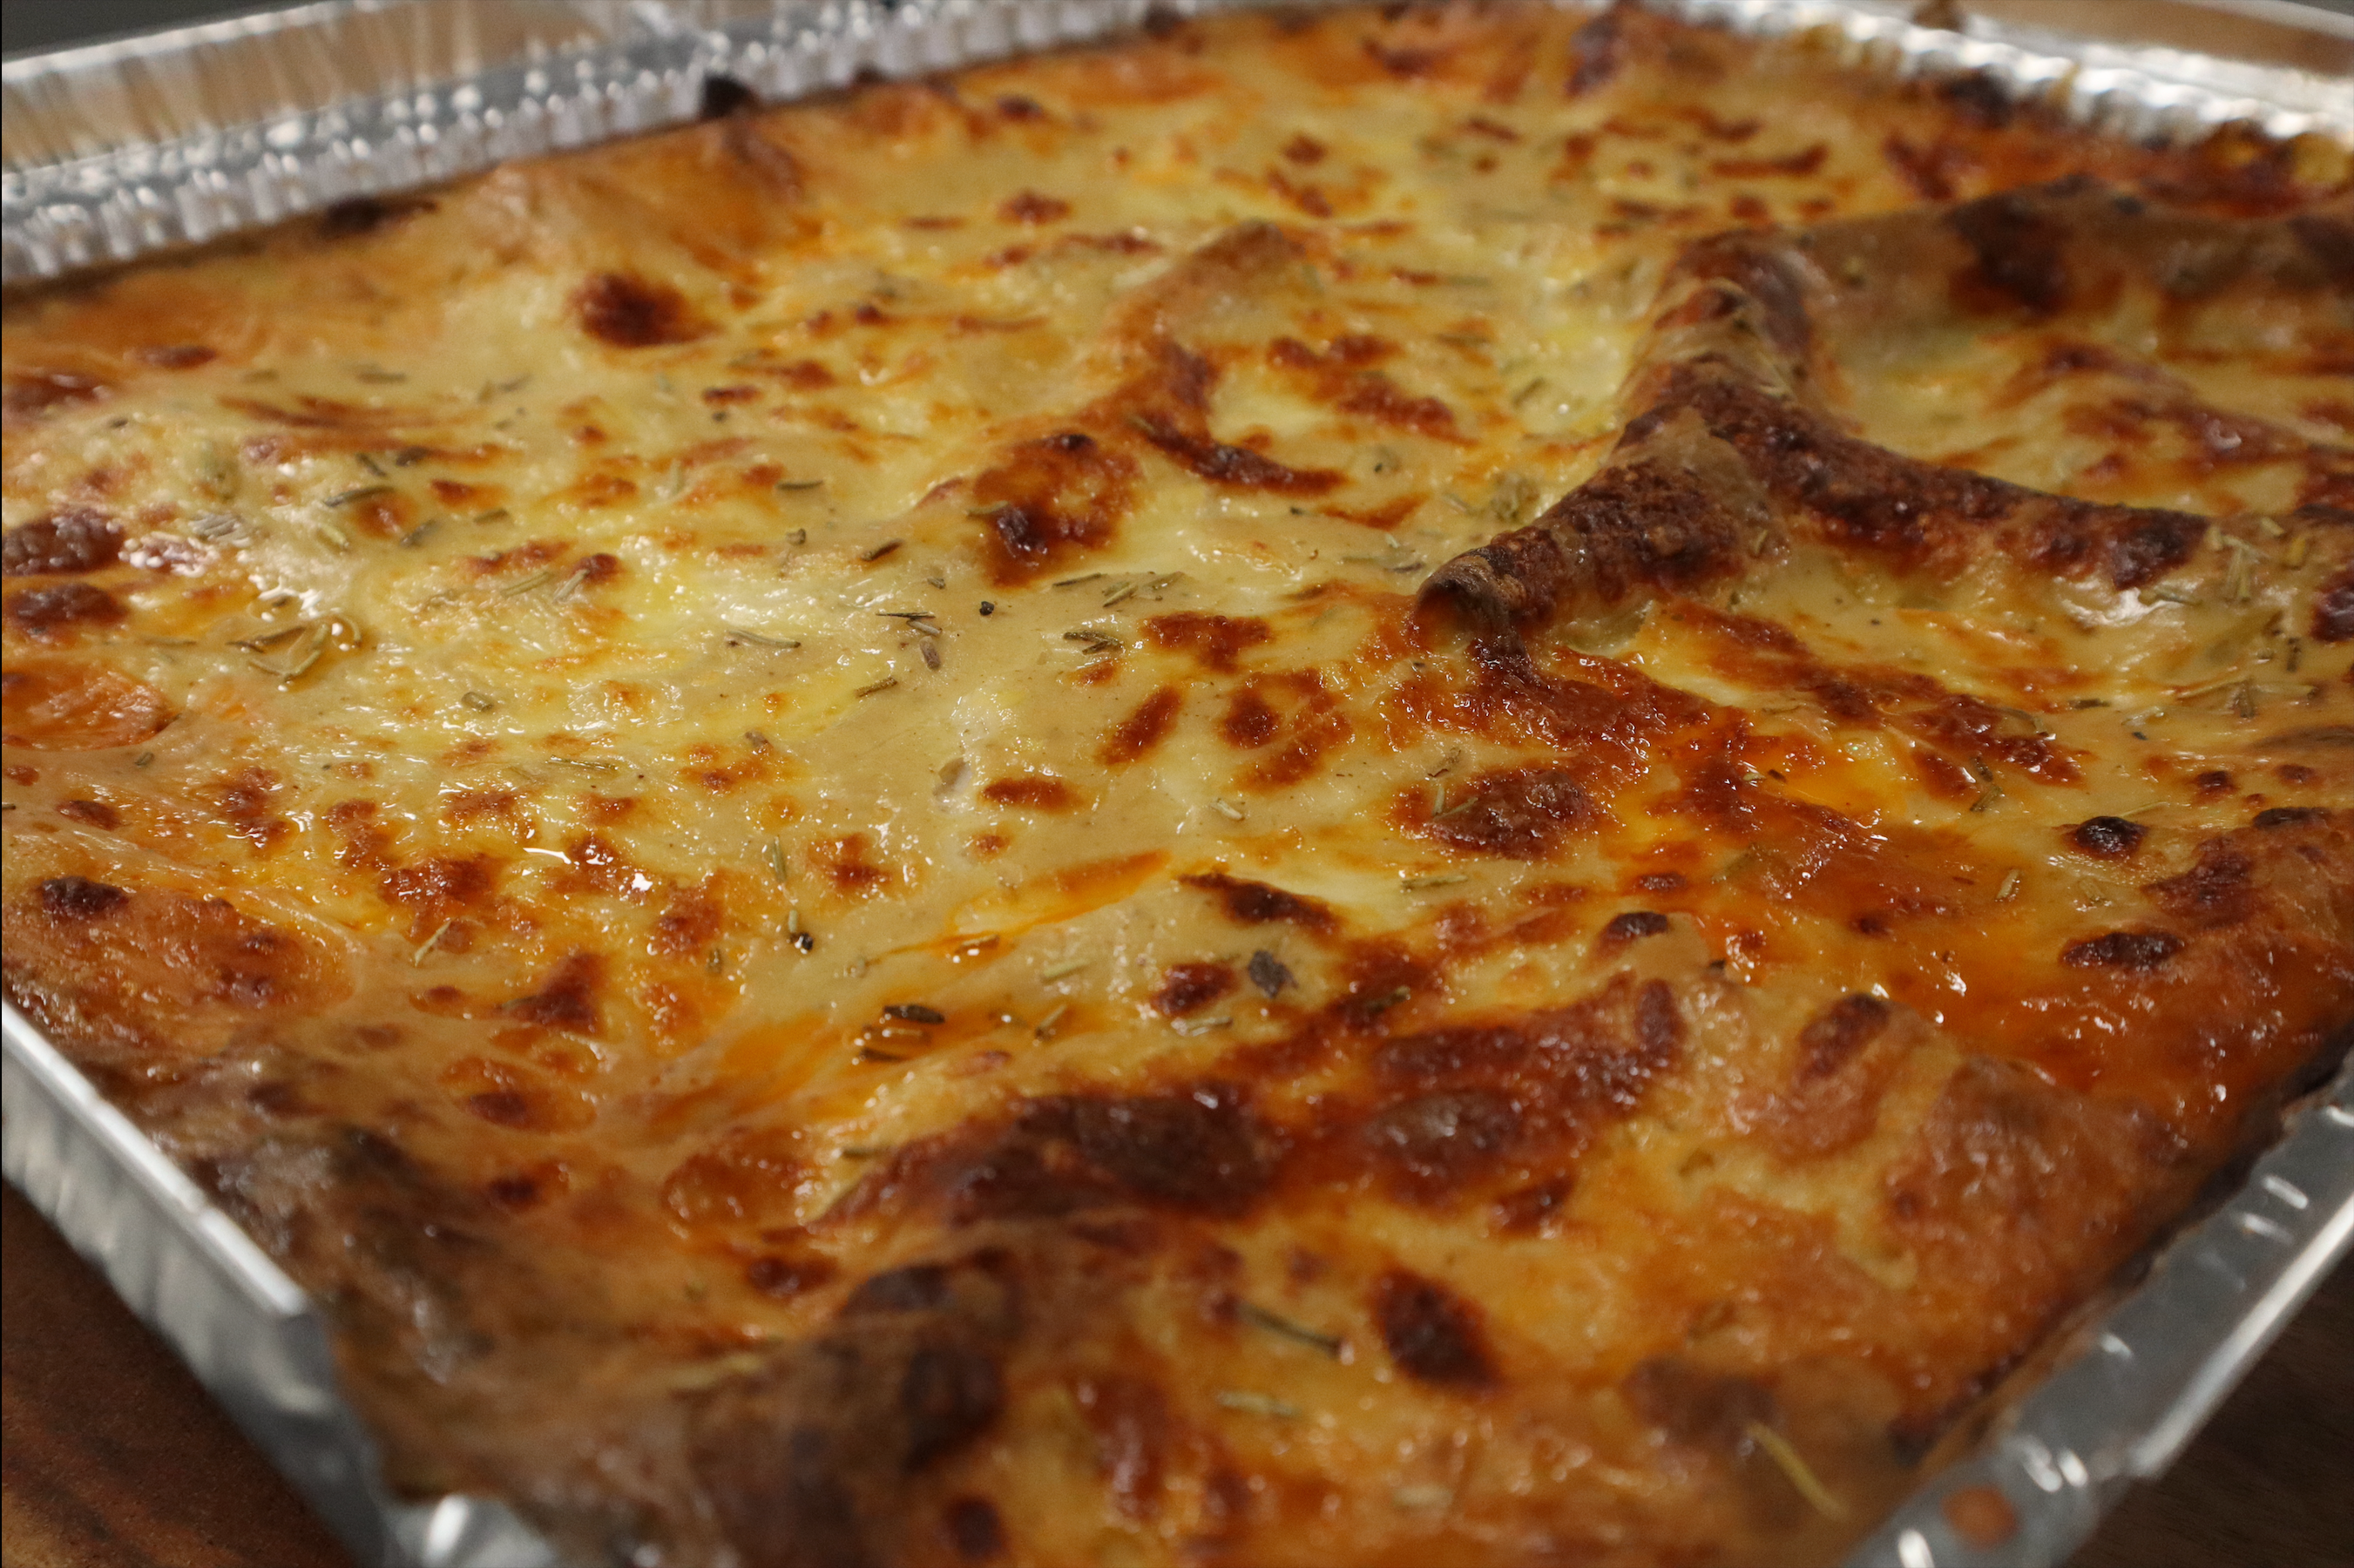 Family Beef Christmas Lasagne (Serves 6)